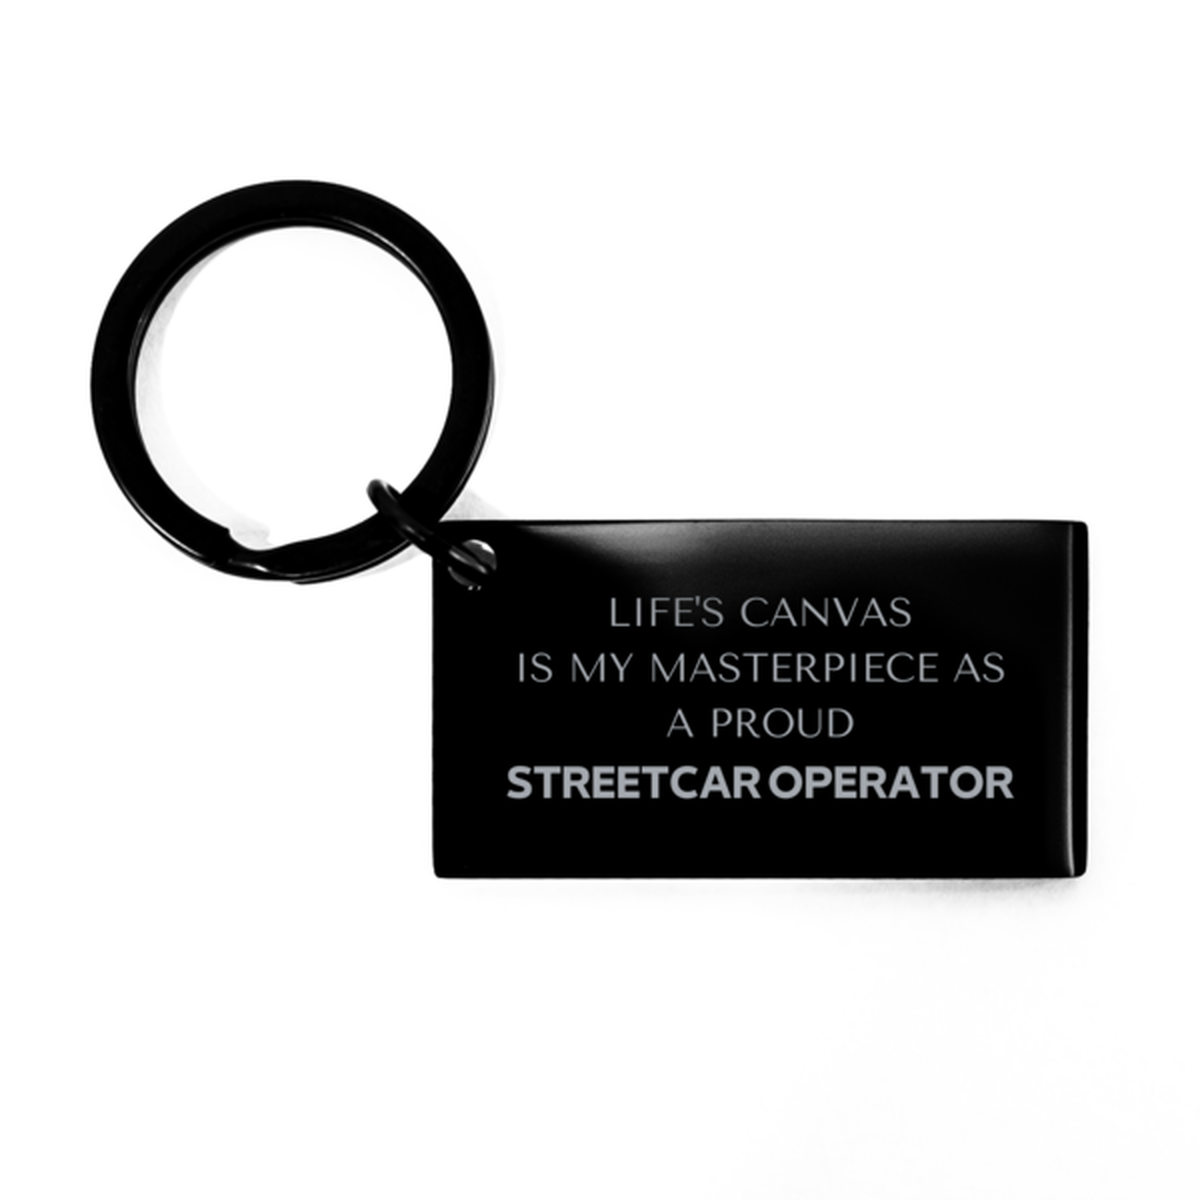 Proud Streetcar Operator Gifts, Life's canvas is my masterpiece, Epic Birthday Christmas Unique Keychain For Streetcar Operator, Coworkers, Men, Women, Friends